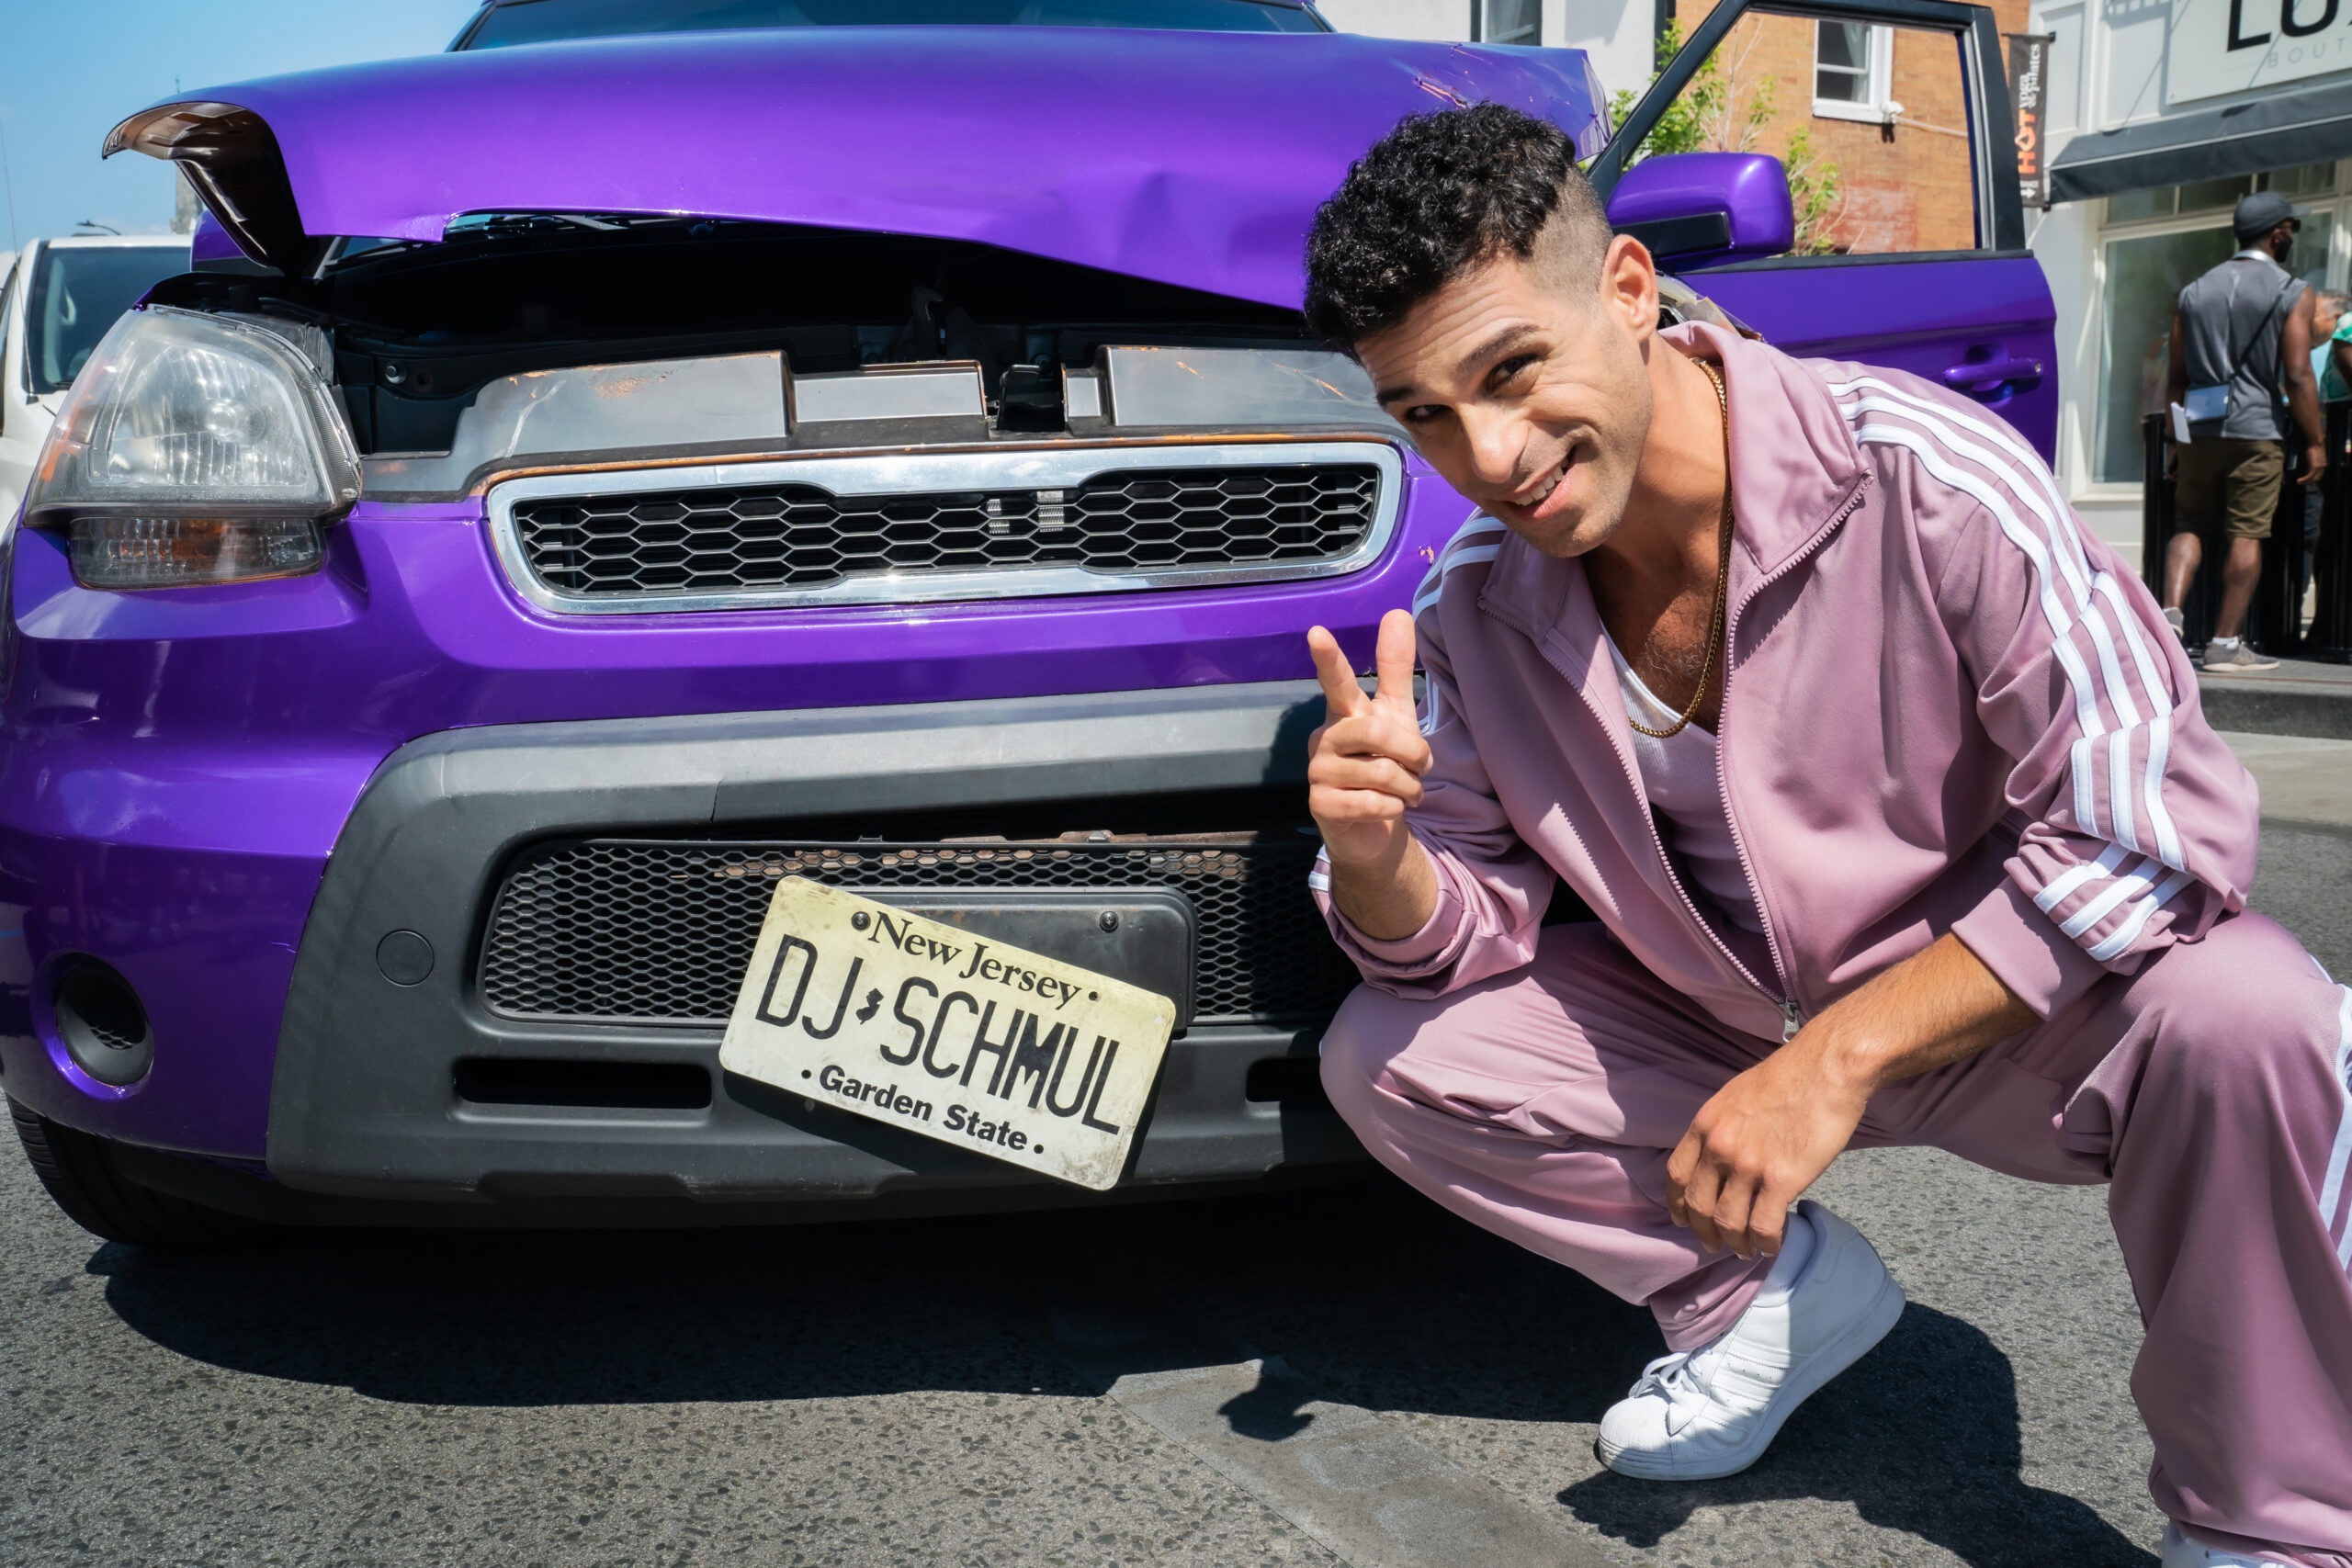 Dj Shmuley in front of a broken down purple car with New Jersey license plates